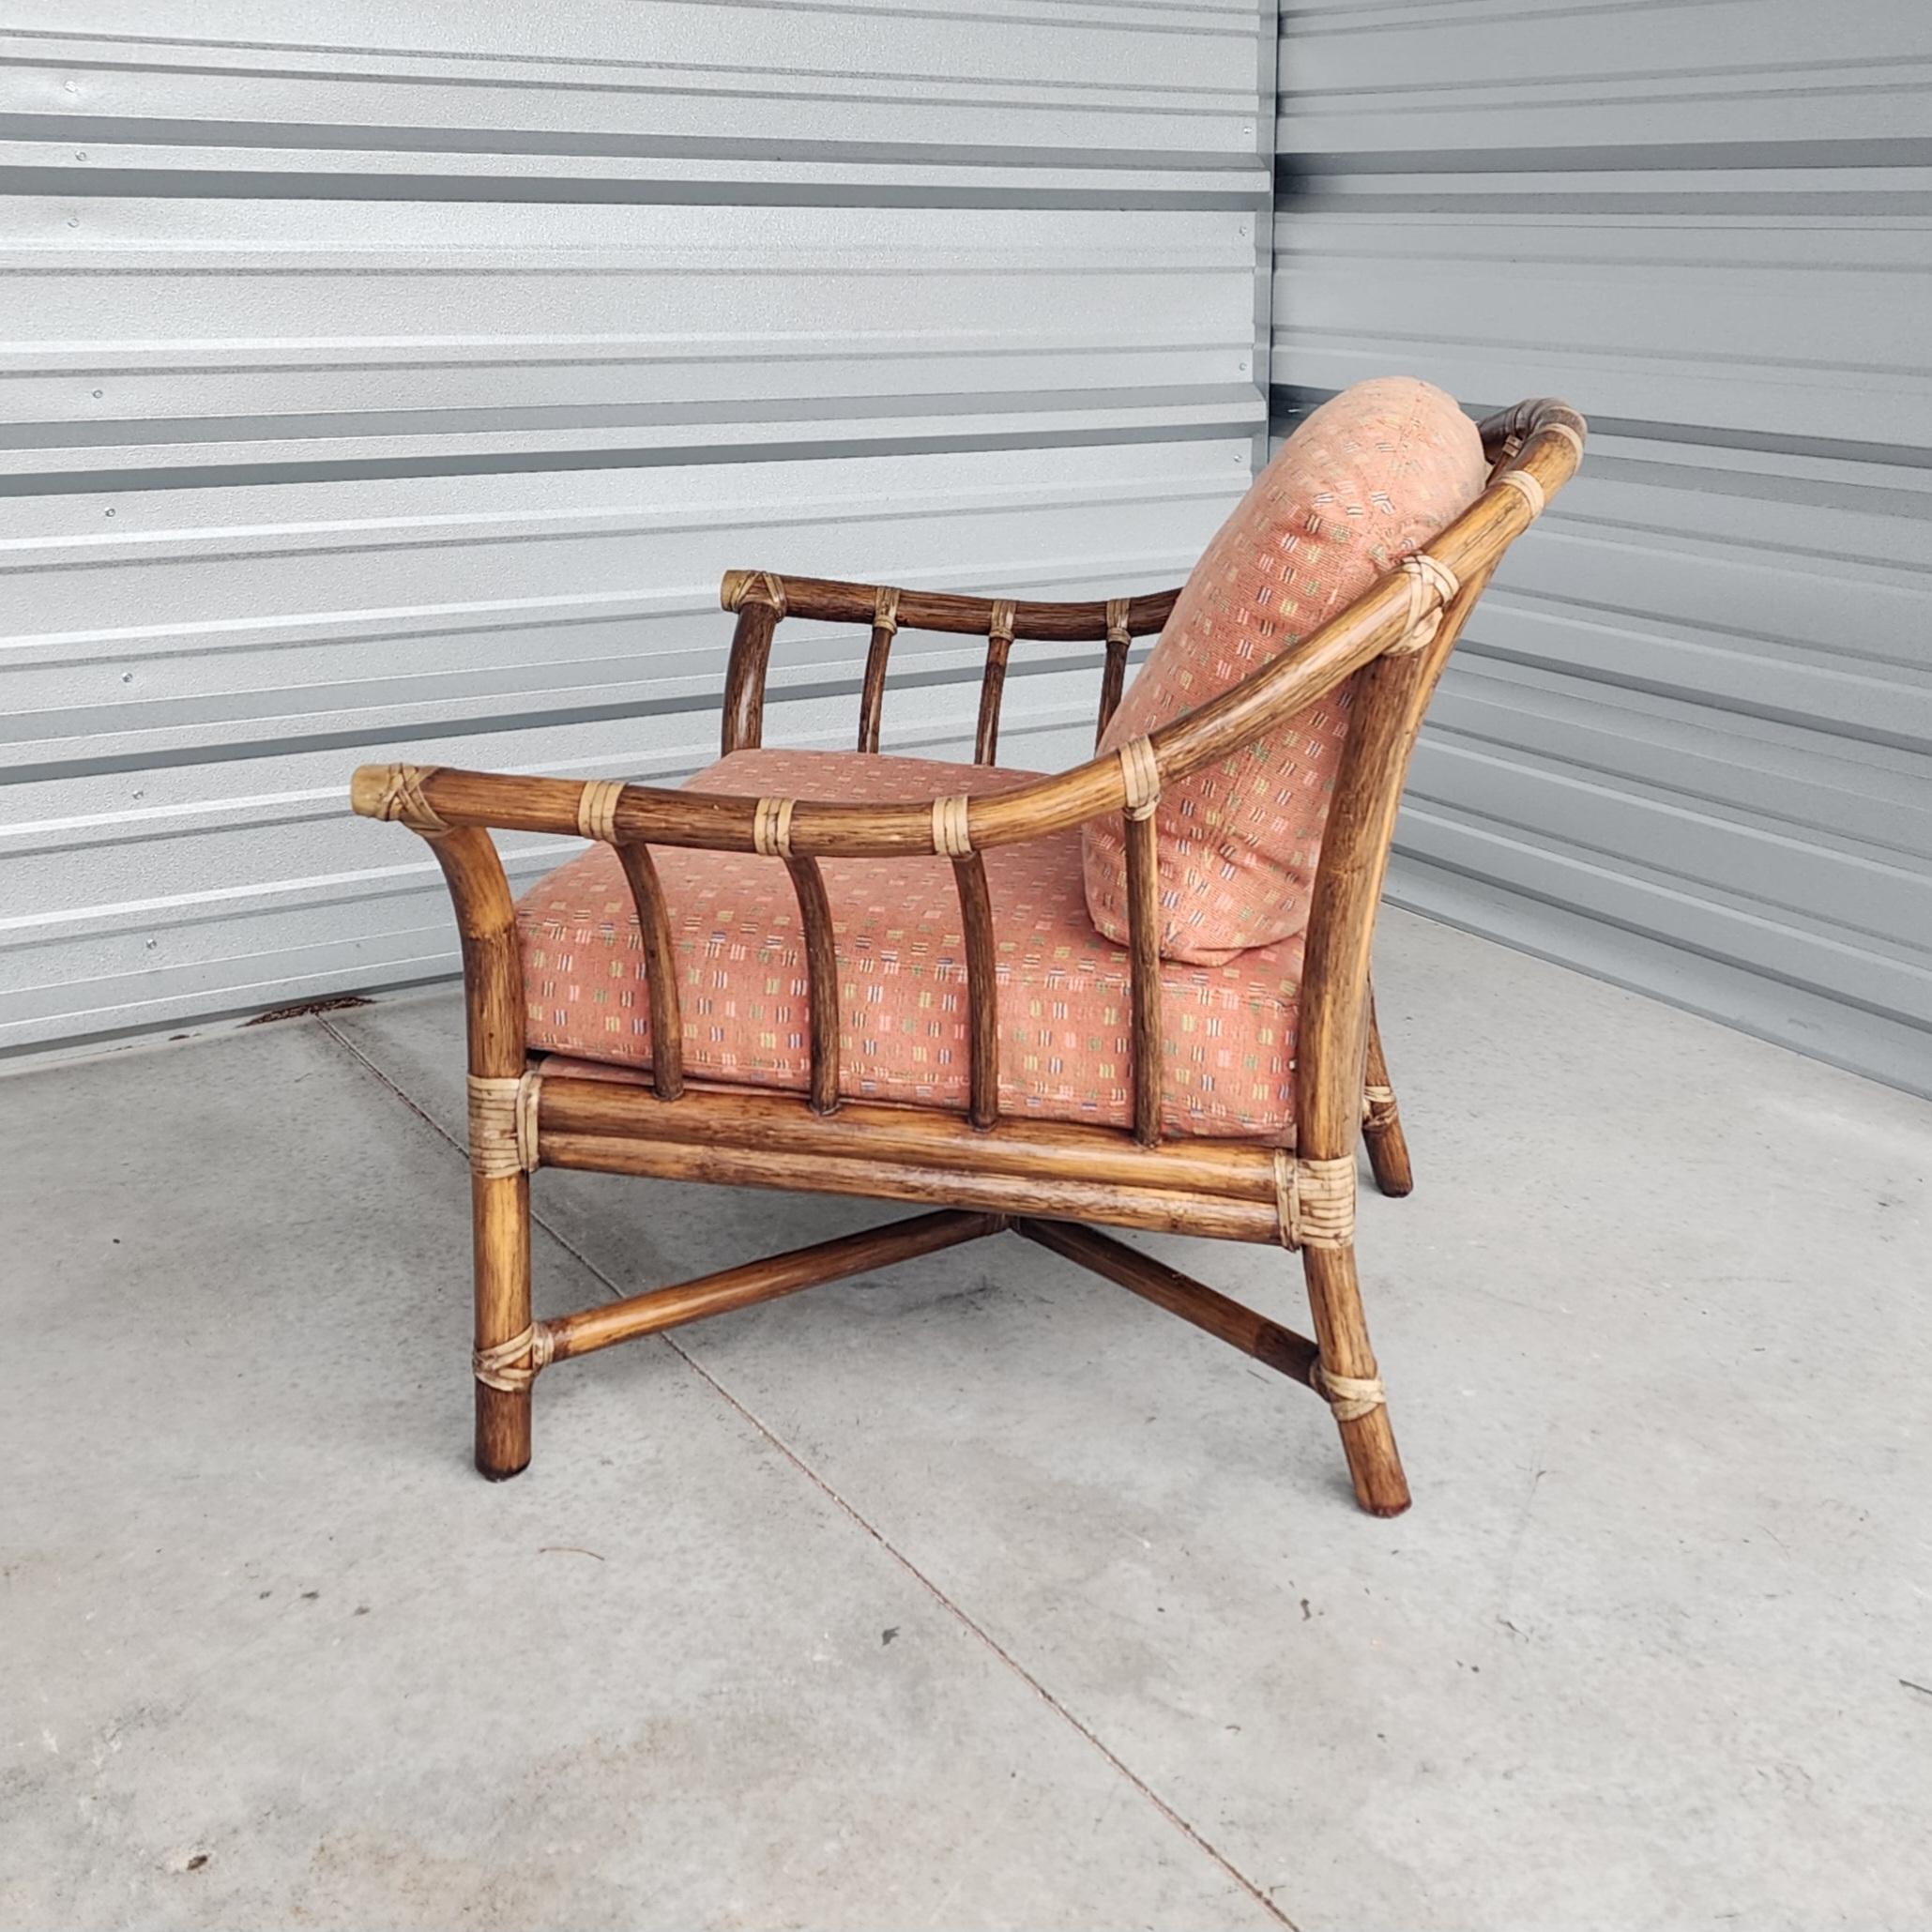 Gorgeous oversized bent rattan lounge chair made in the California organic modern coastal style by McGuire. This chair features a large horseshoe shaped bent rattan frame with gracefully curved supports. The finish is a lovely darker walnut in color